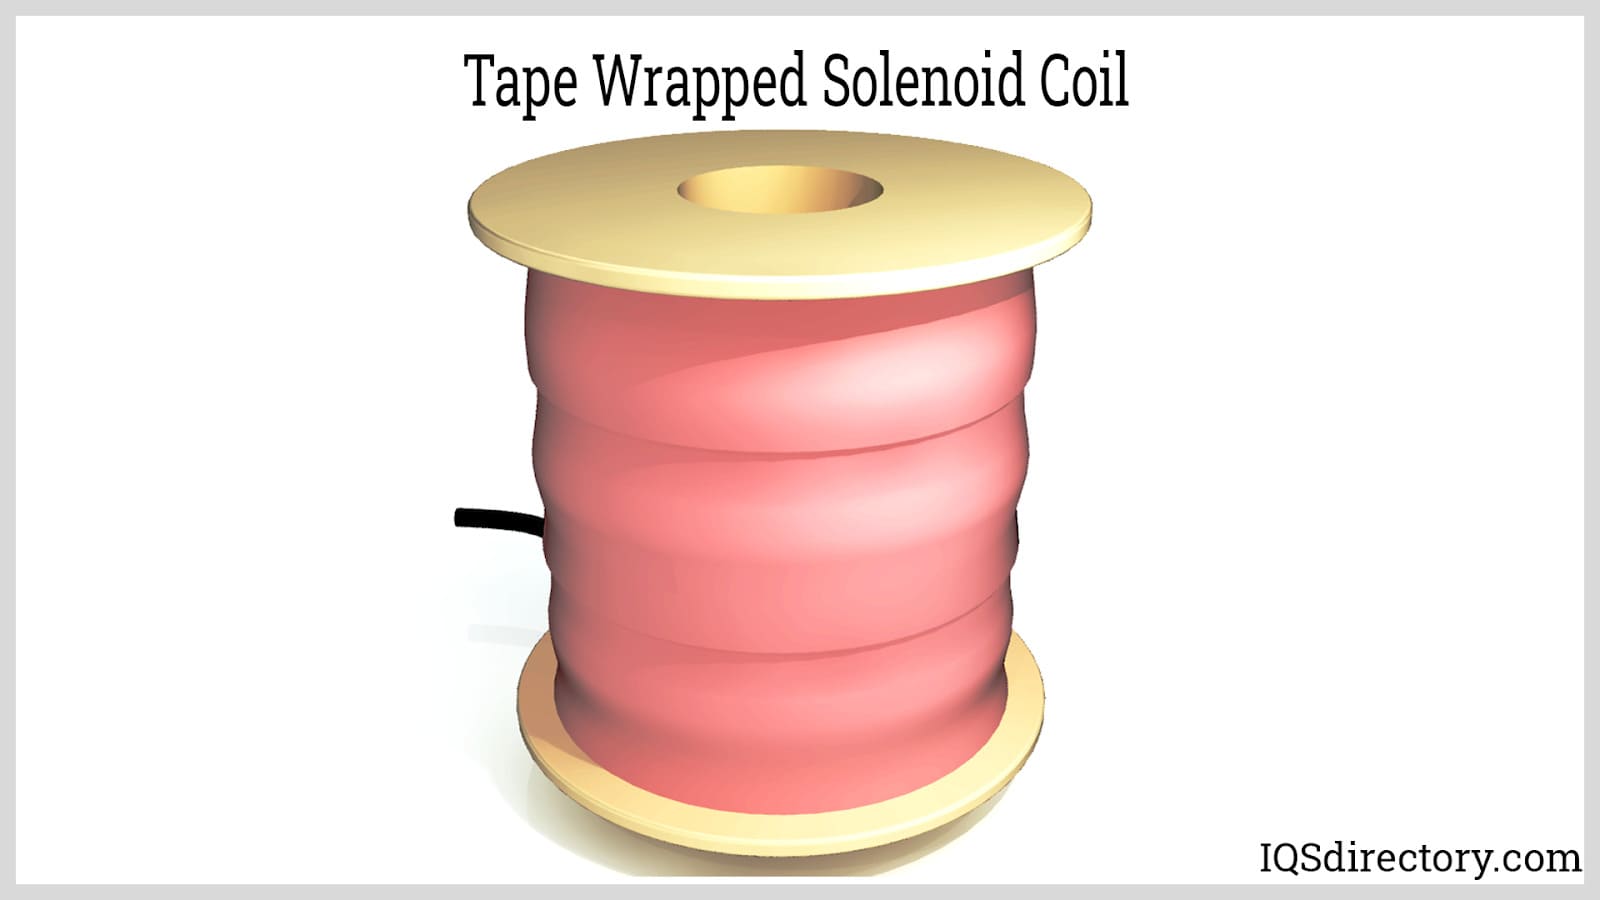 Tape Wrapped Solenoid Coil